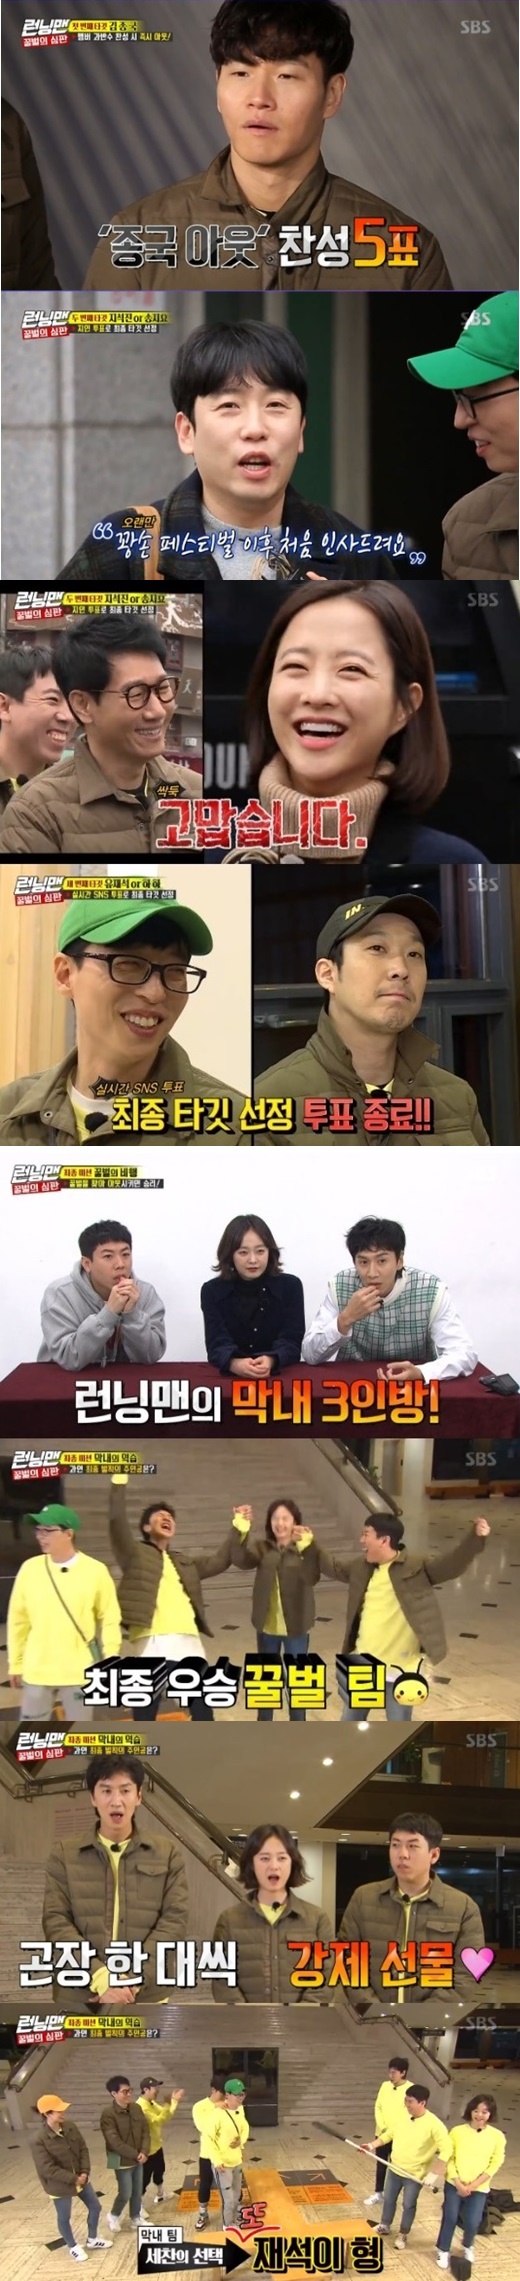 SBS Running Man took first place in 2049 ratings.According to Nielsen Korea, a ratings agency on the 4th, Running Man, which was broadcast on the 3rd night, ranked first among the entertainment programs of the same time zone with a record of 2049 target audience rating 4% (based on the second part of the audience rating of Seoul Capital Area).The average audience rating was 5.1% in the first part and 6.7% in the second part (based on the audience rating of Seoul Capital Area households), and the highest audience rating per minute rose to 7.6%.On this day, the broadcast was decorated with a bee referee race that did not know what was happening.The first singer Kim Jong-kook was on the bench, and the In-N-Out Burger vote resulted in five votes in favor and two votes in opposition.Kim Jong-kook was absurd about the results of the vote, but the members laughed at each other pretending not to be themselves.Song Ji-hyo and Ji Suk-jin were put on the bench, and actors Park Bo-young, comedian Nam Chang-hee and Emperor appeared as entertainer judges.In particular, Park Bo-young revealed his secrets with a chance surprise appearance, but he showed his beauty without humiliation and made everyone feel better.Park Bo-young chose Ji Suk-jin as the person to make In-N-Out Burger with Nam Chang-hee and Emperor, saying, Song Ji-hyo is like a sister, and Ji Suk-jin is just a king-knock.Since then, the member who was decided to be the final target through real-time SNS voting among Haha and Yoo Jae-Suk was Yoo Jae-Suk.Members were given a race to catch bees, and in the process, they removed fake bees Yoo Jae-Suk.15 Minute Race started, Honey Bee Yang Se-chan was eliminated, and the members found out Honey Bee was the youngest line trio.Kim Jong-kook, Song Ji-hyo and Haha struggled, but Lee Kwang-soo kept the youngest team victory and pointed to Yoo Jae-Suk as a penalty member.Yoo Jae-Suk was baptized with a prickly plight; the scene had a best one minute with a highest audience rating of 7.6 per minute.